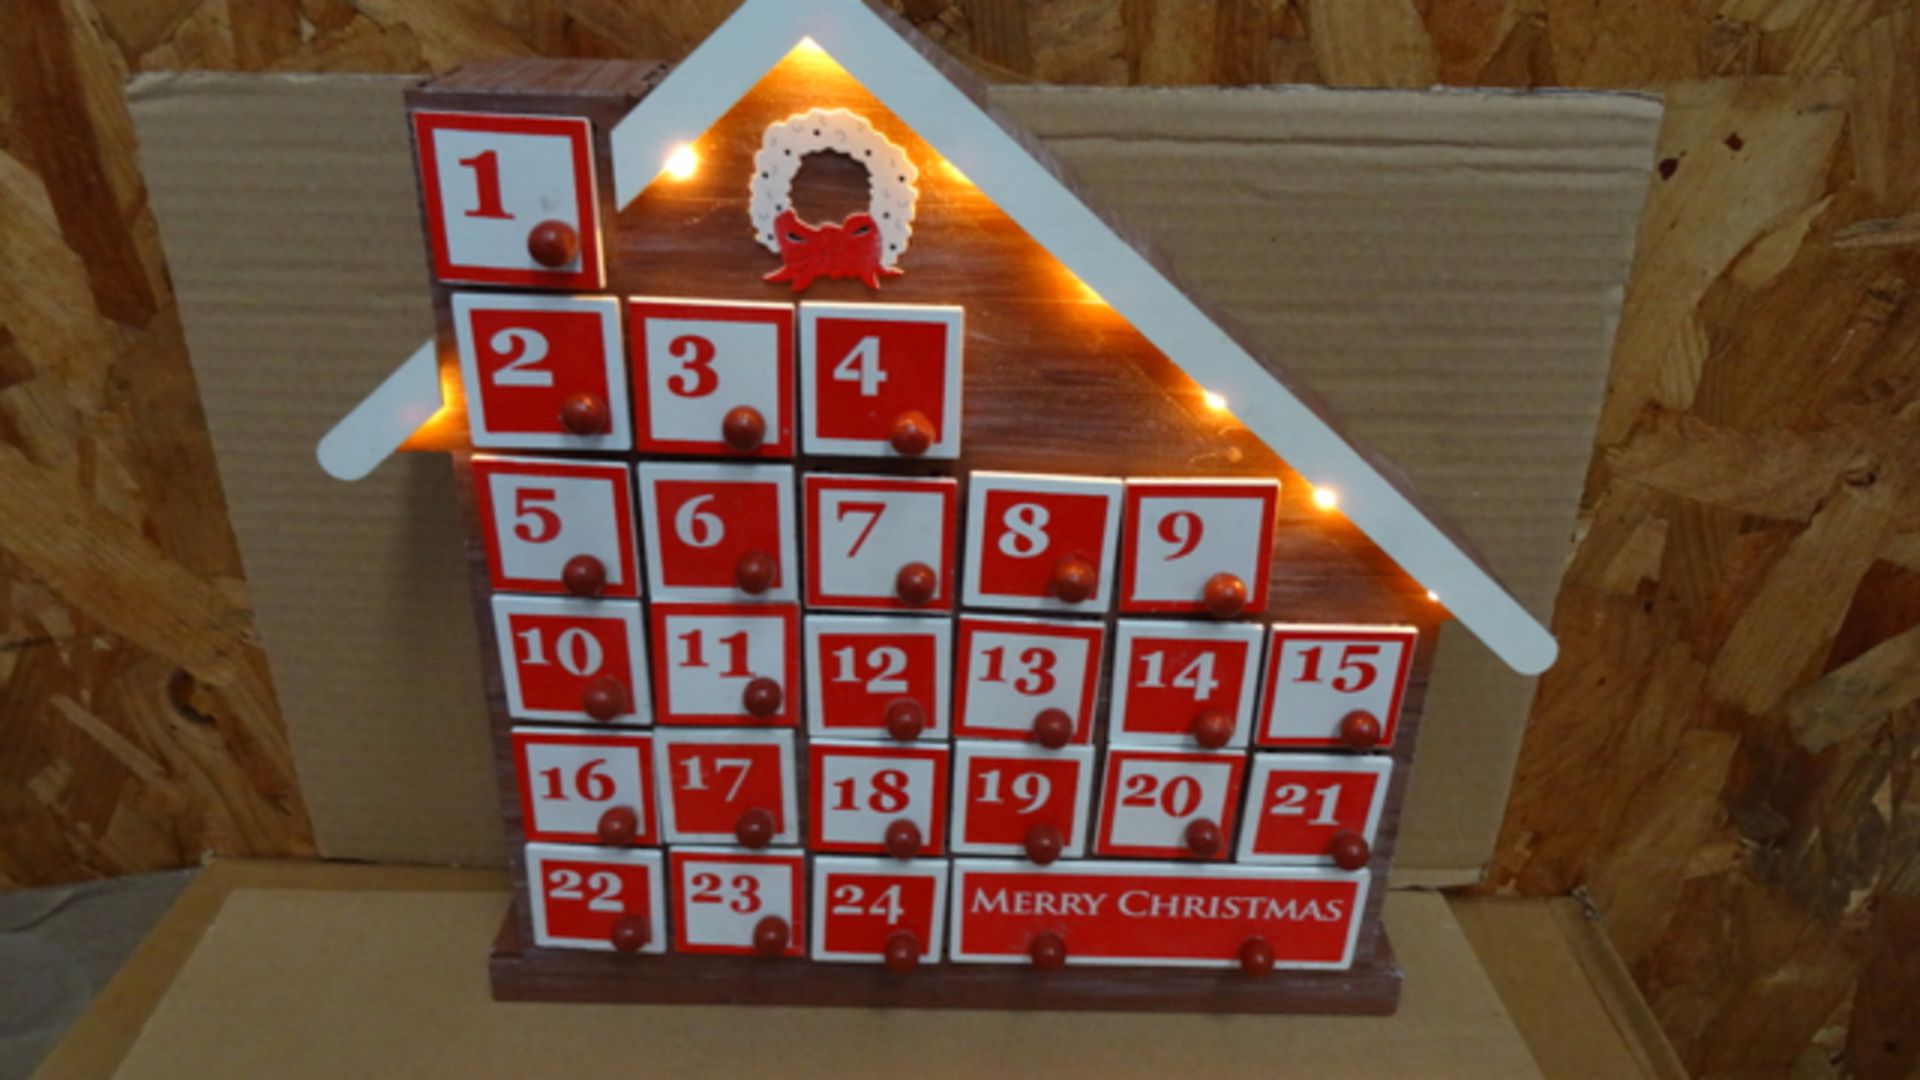 6 x Christmas Workshop Wooden Advent Calendar House with 8 LED Lights. RRP £40 Each
The Christmas